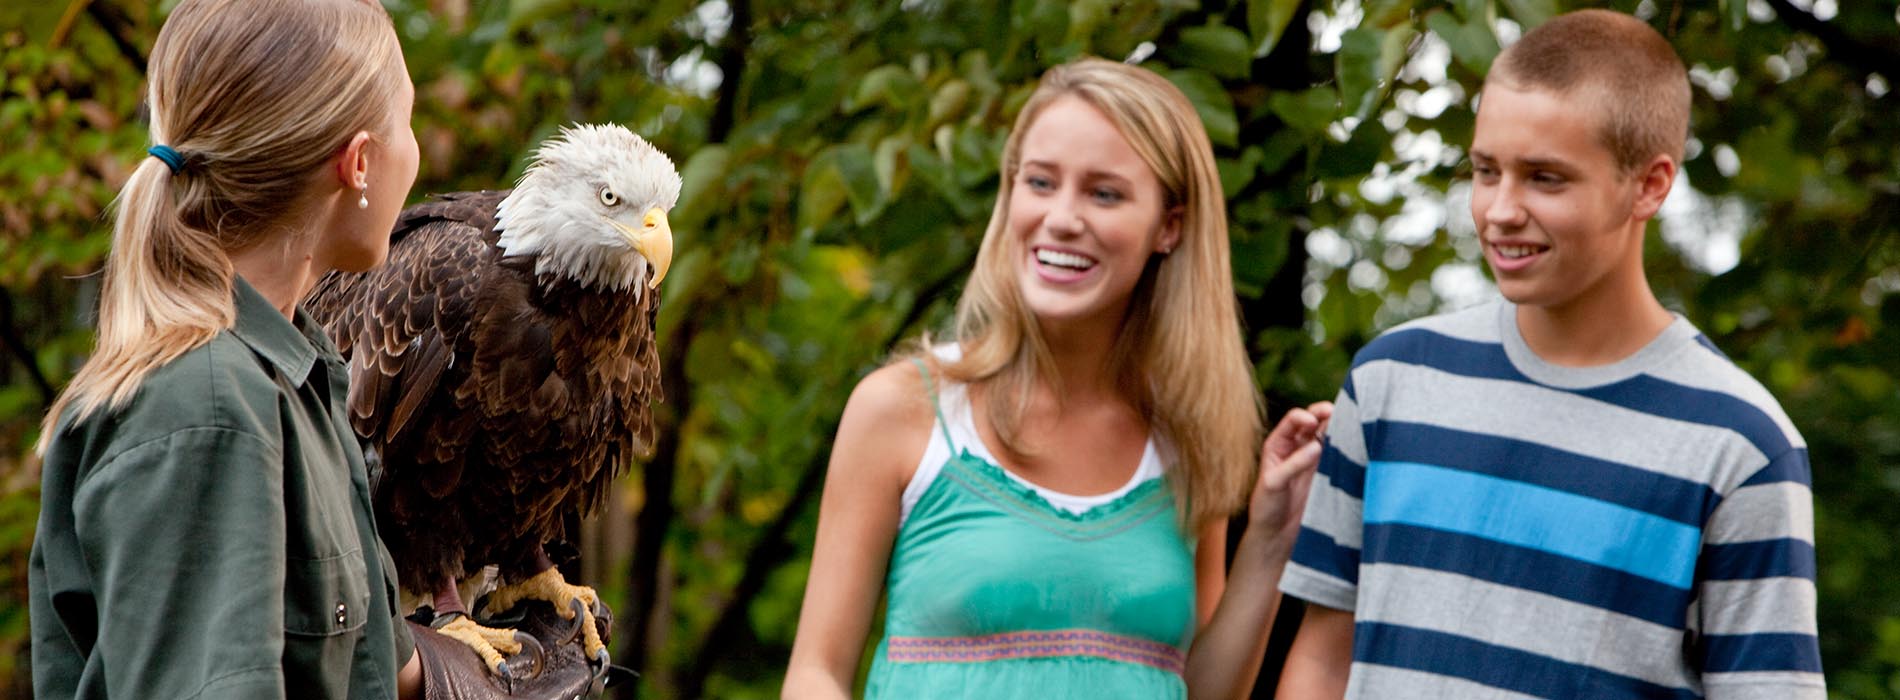 A zookeeper with an eagle